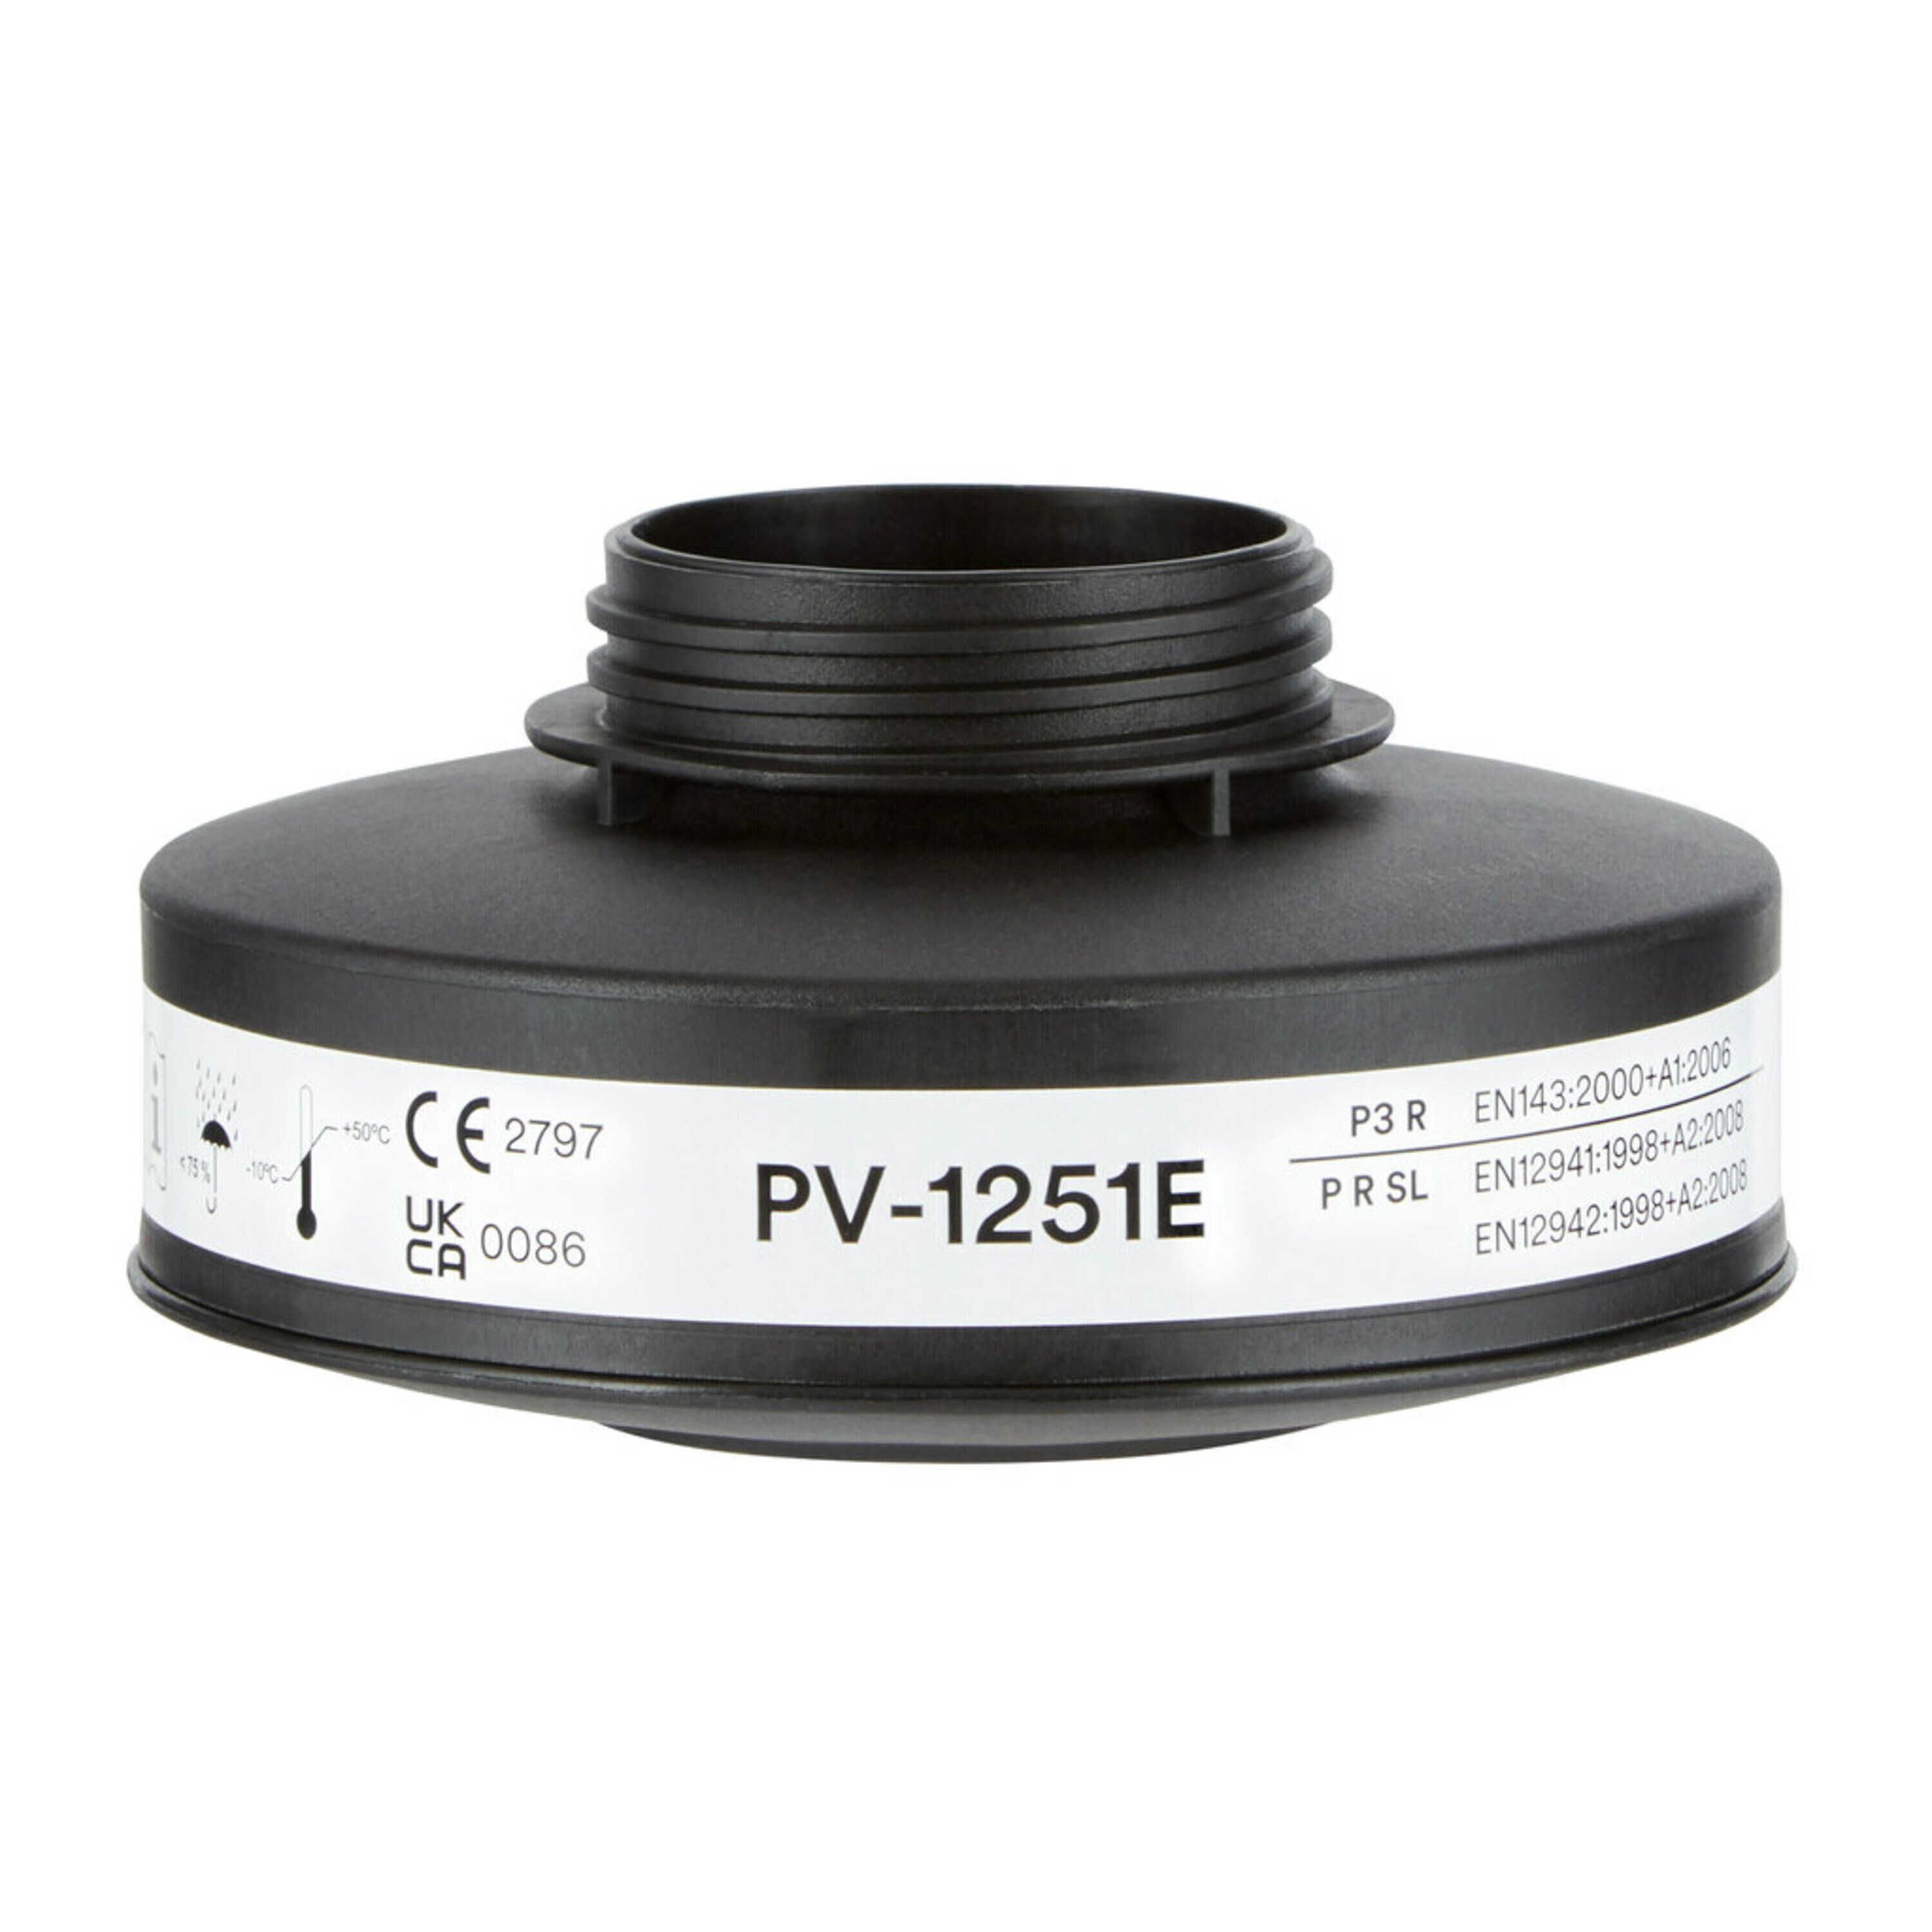 3M Particle filter PV-1251E